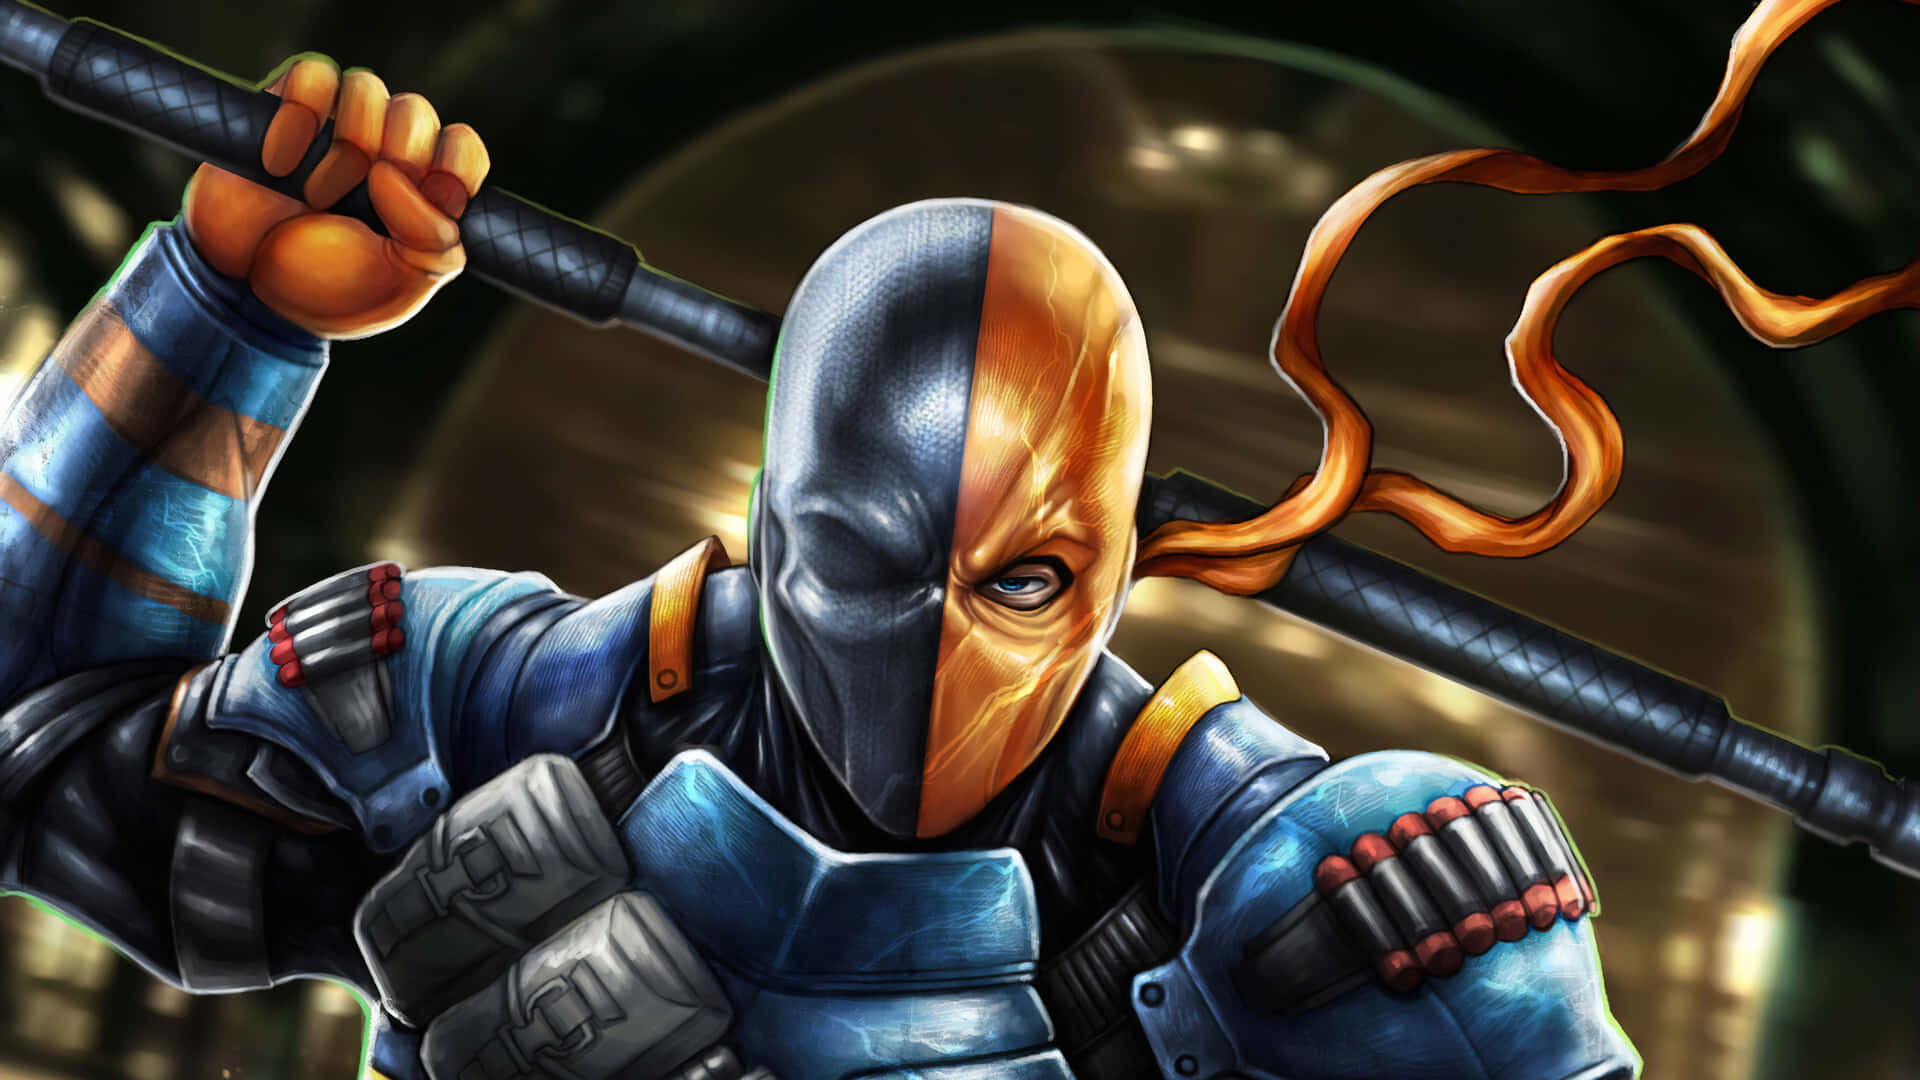 Out for revenge, 'Deathstroke' is ready for battle